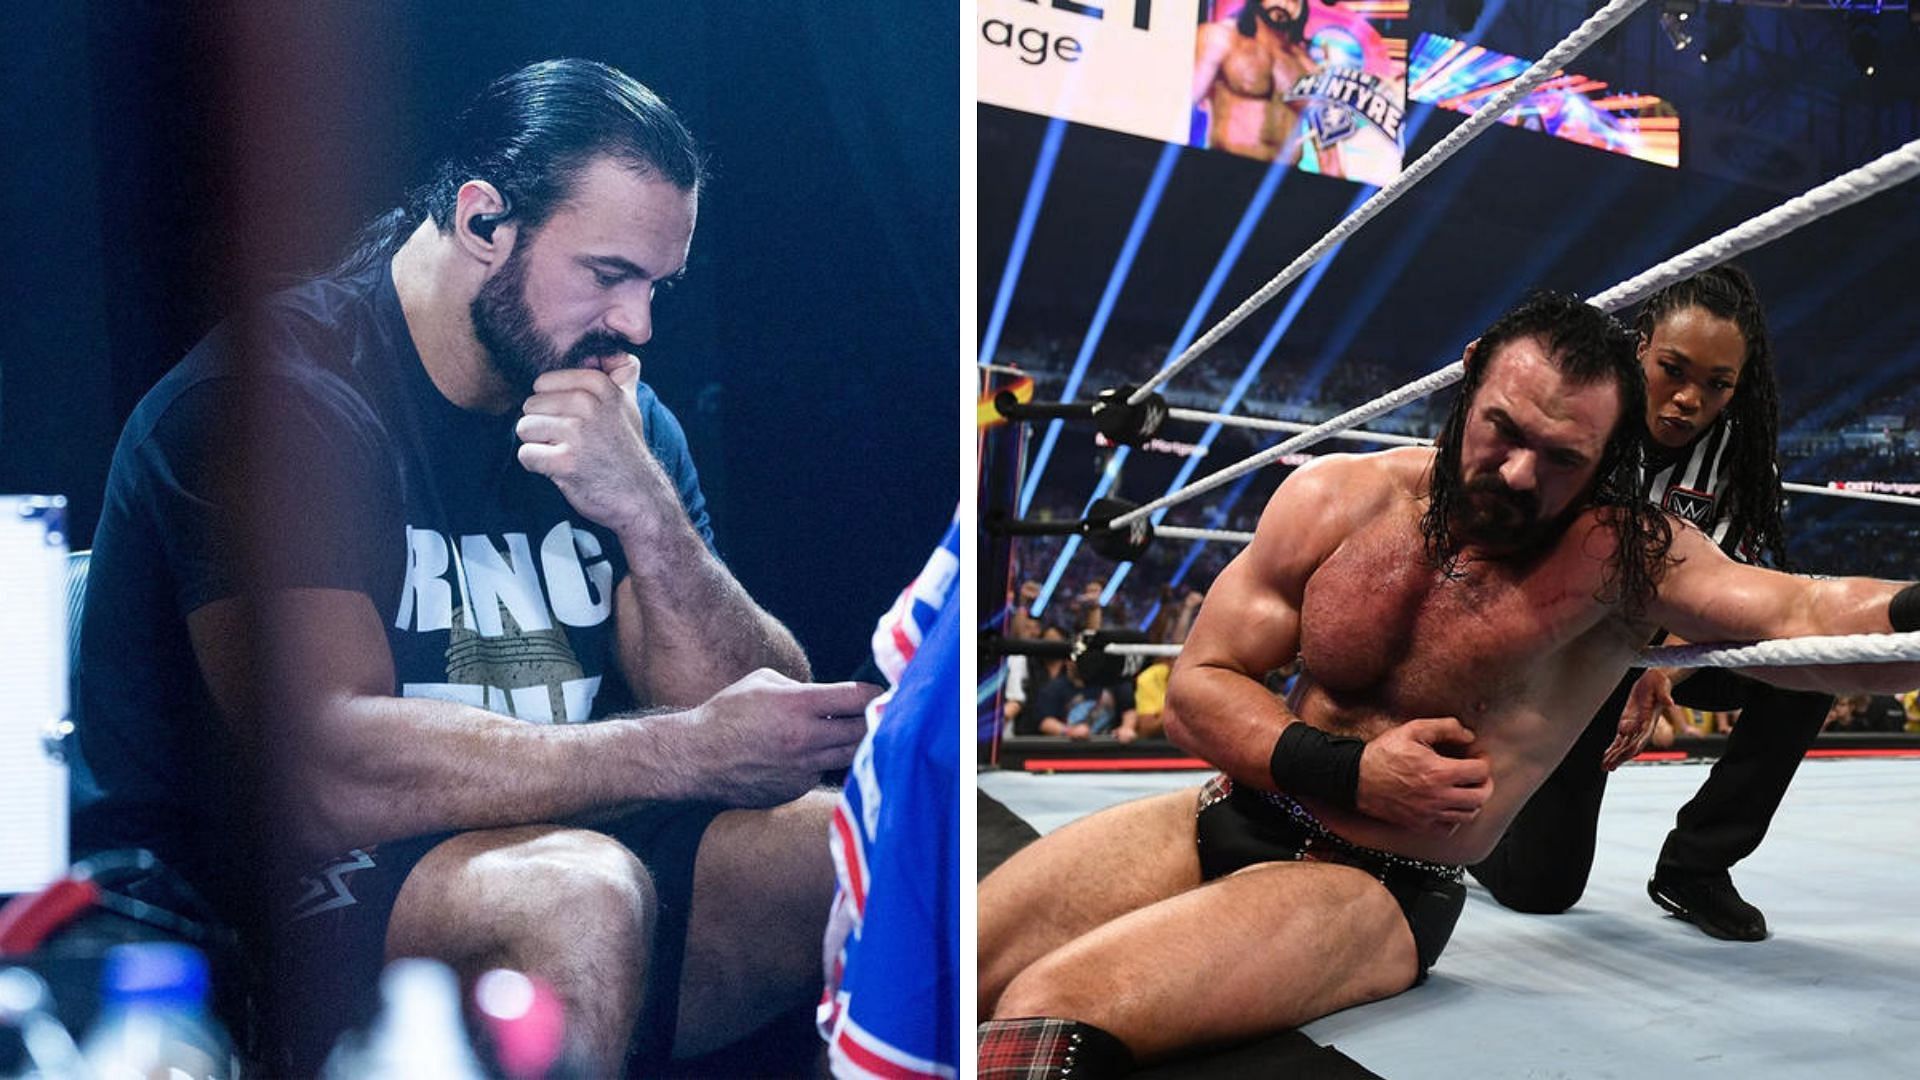 Drew McIntyre recently turned over a new leaf on WWE